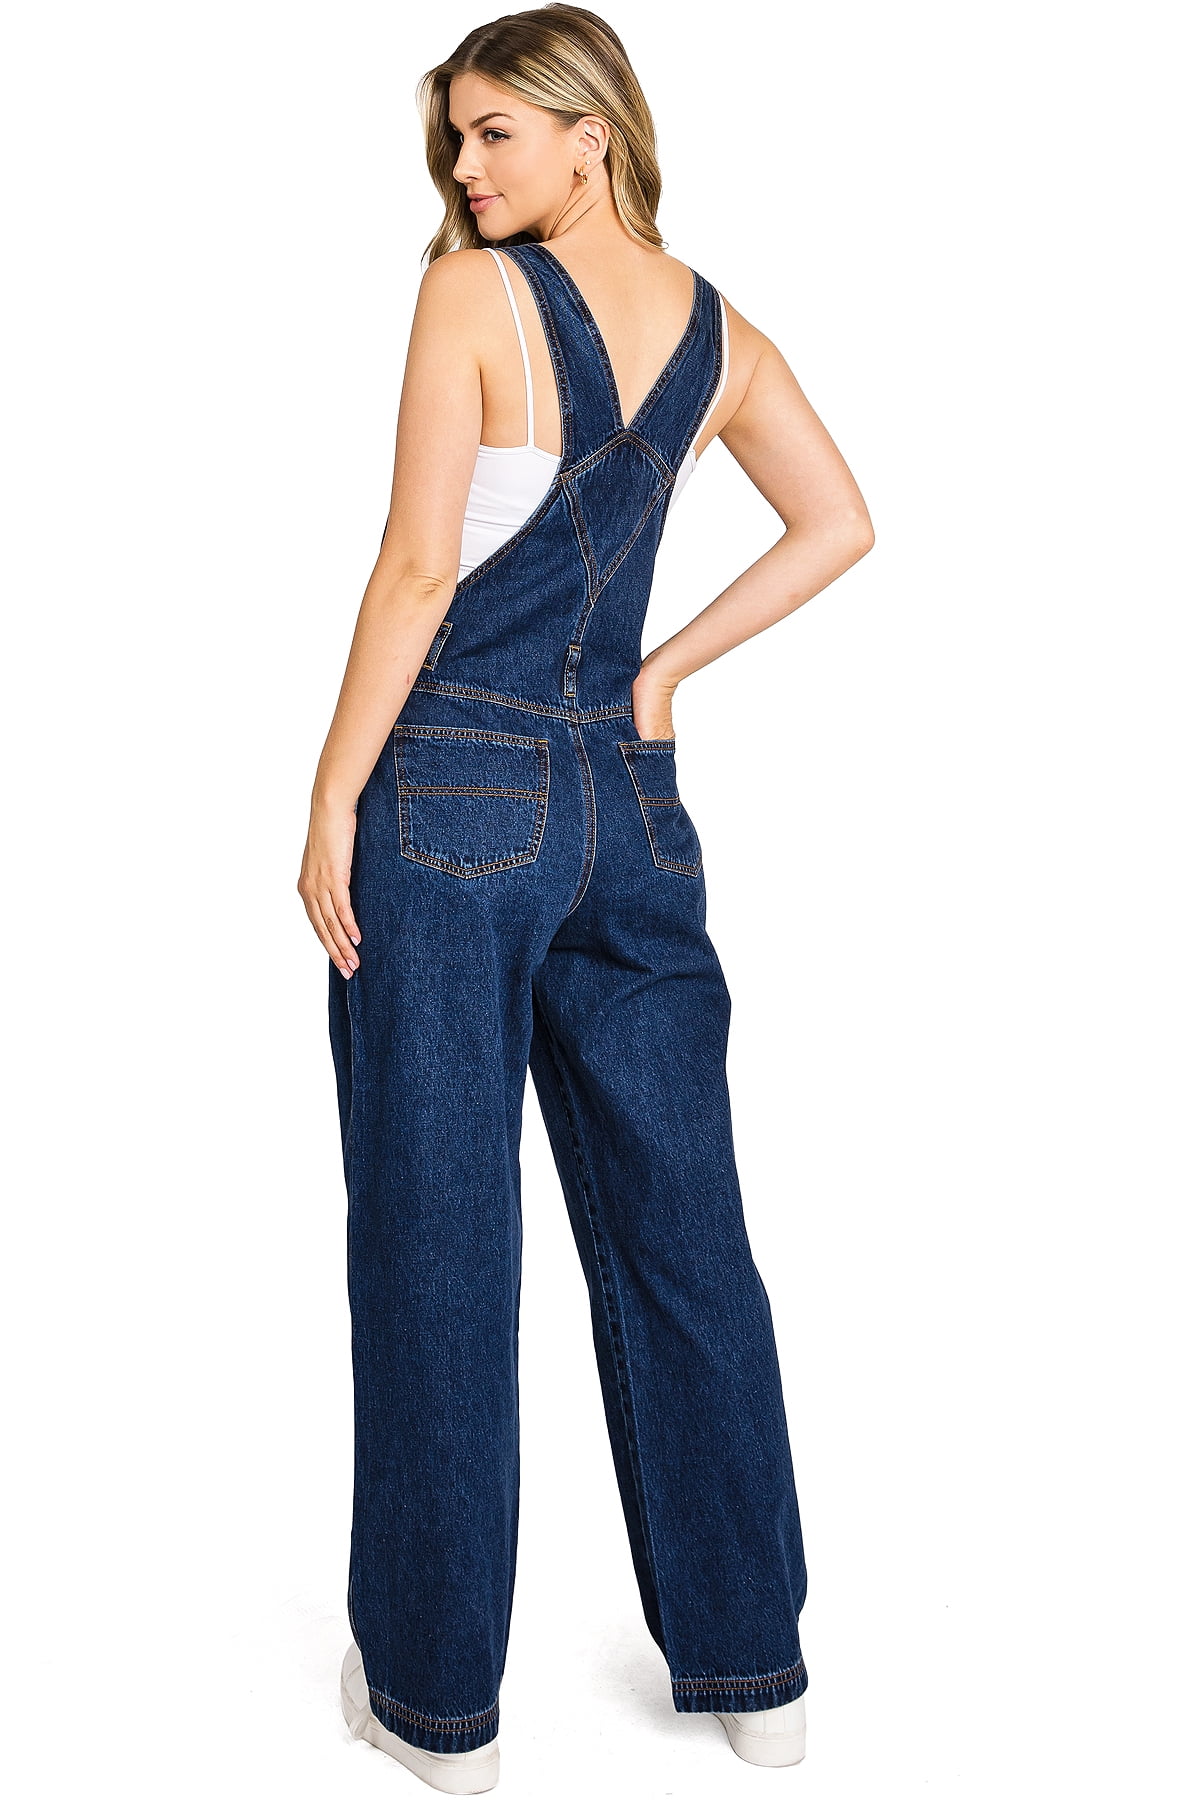 Buy FOREVER 21 Women Solid Denim Dungarees - Dungarees for Women 6795407 |  Myntra